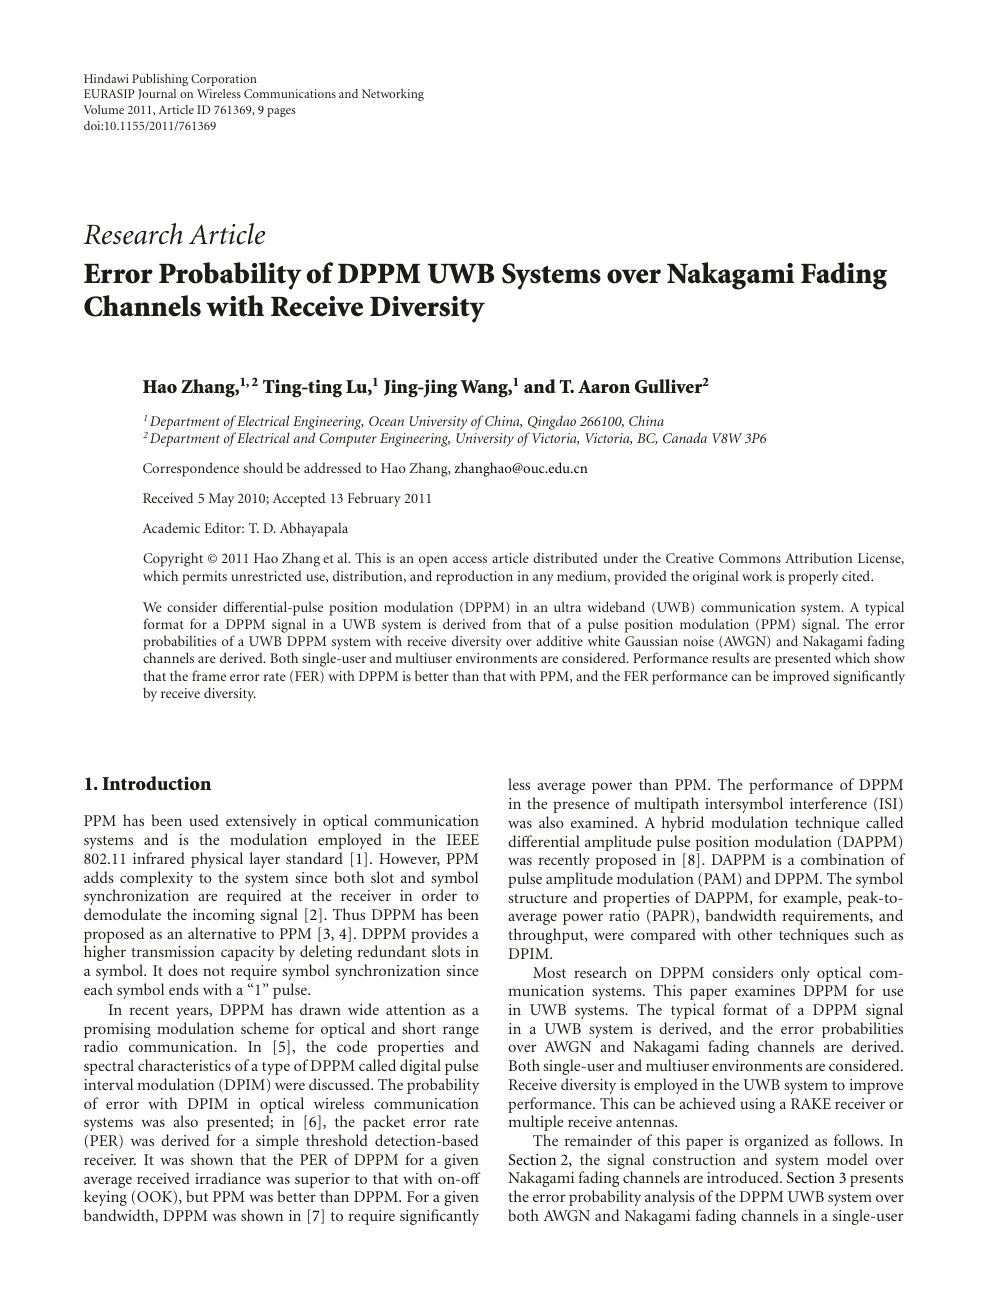 Error Probability Of Dppm Uwb Systems Over Nakagami Fading Channels With Receive Diversity Topic Of Research Paper In Computer And Information Sciences Download Scholarly Article Pdf And Read For Free On